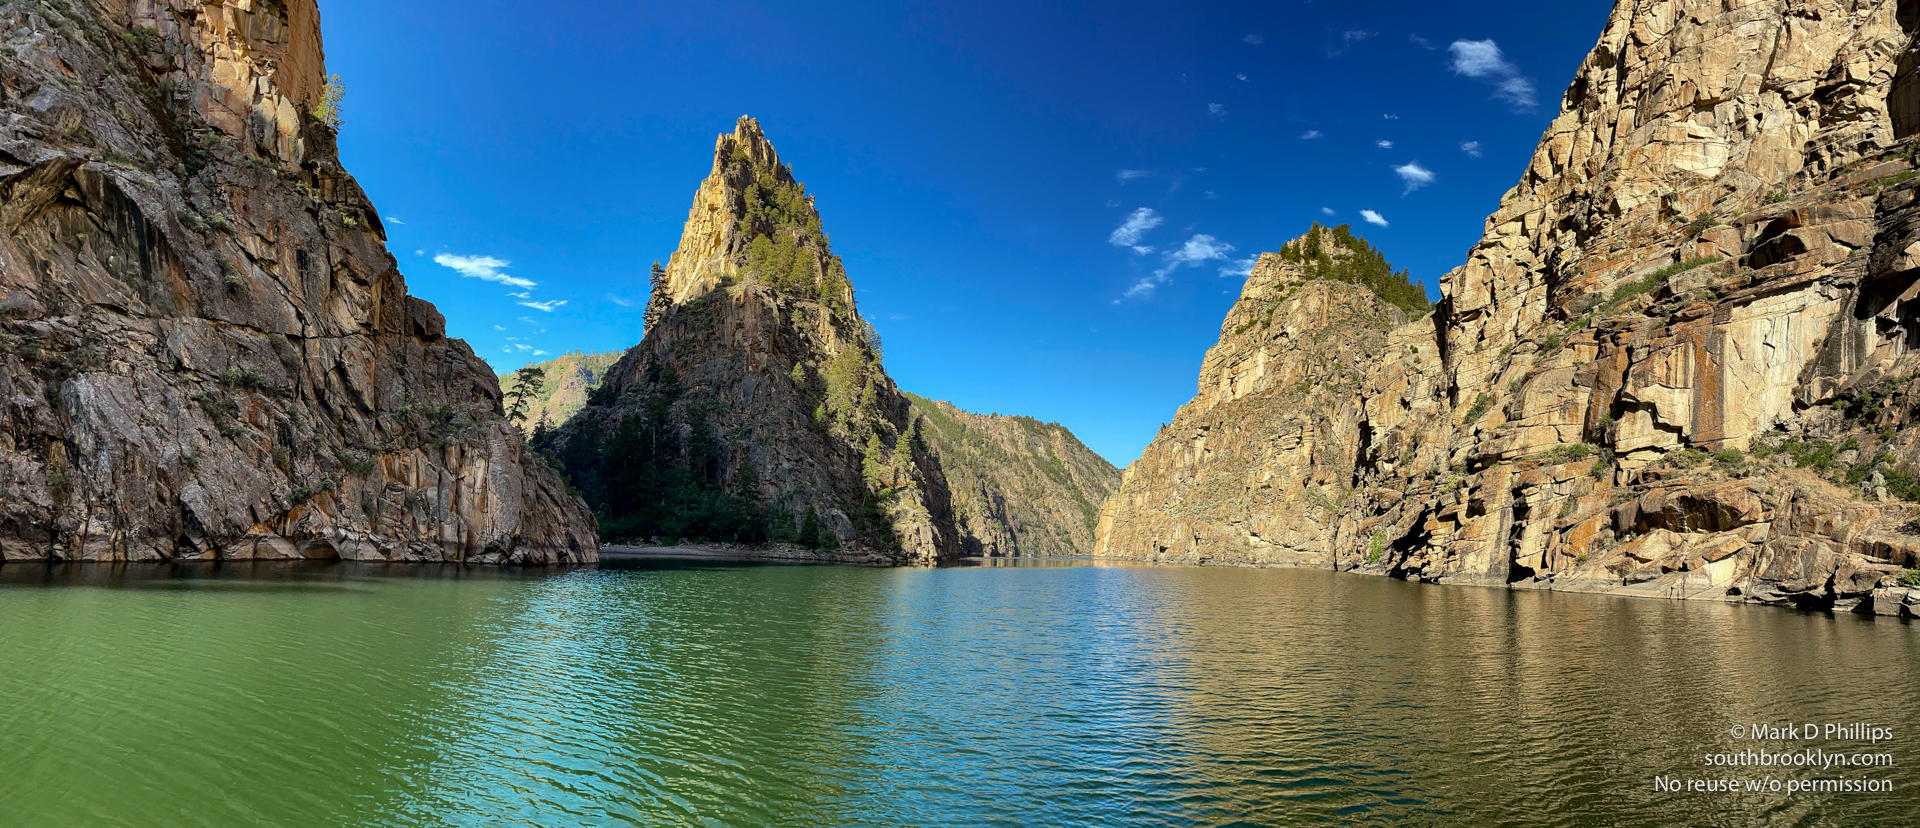 The Curecanti Needle in the Black Canyon of the Gunnison River on a Morrow Point Reservoir fishing boat in a 3/4 panorama. ©Mark D Phillips